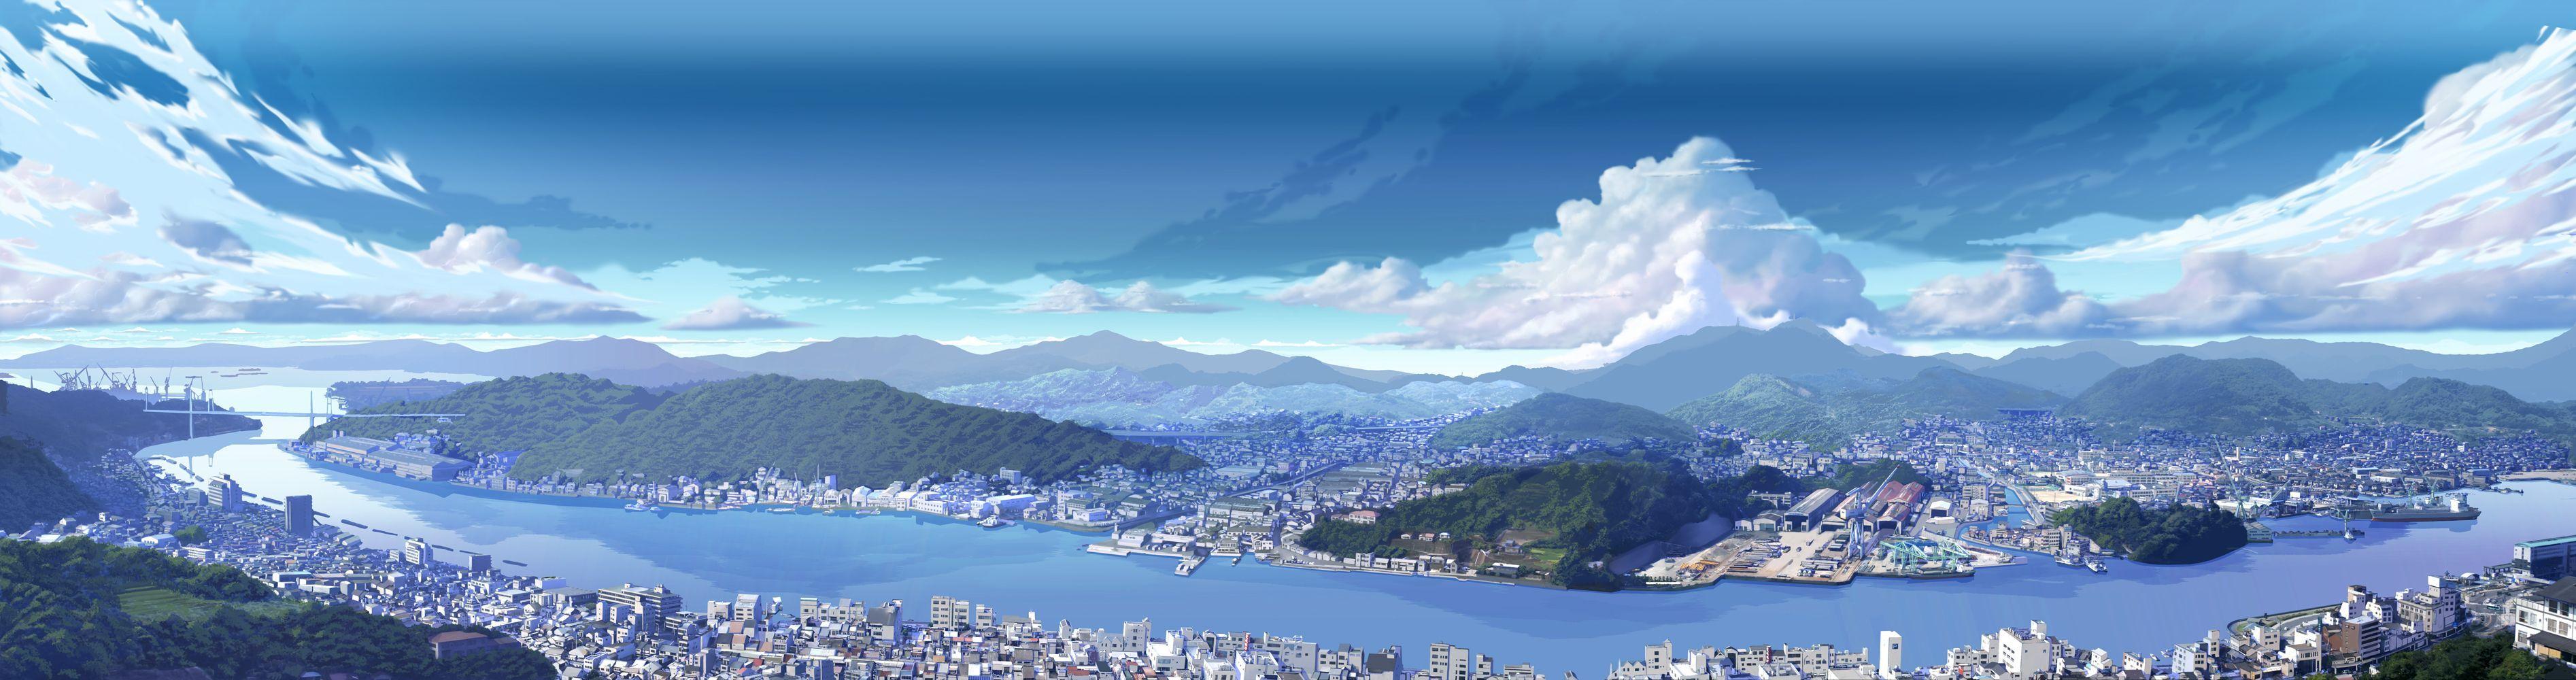 Anime Panoramic Wallpapers Top Free Anime Panoramic Backgrounds Wallpaperaccess